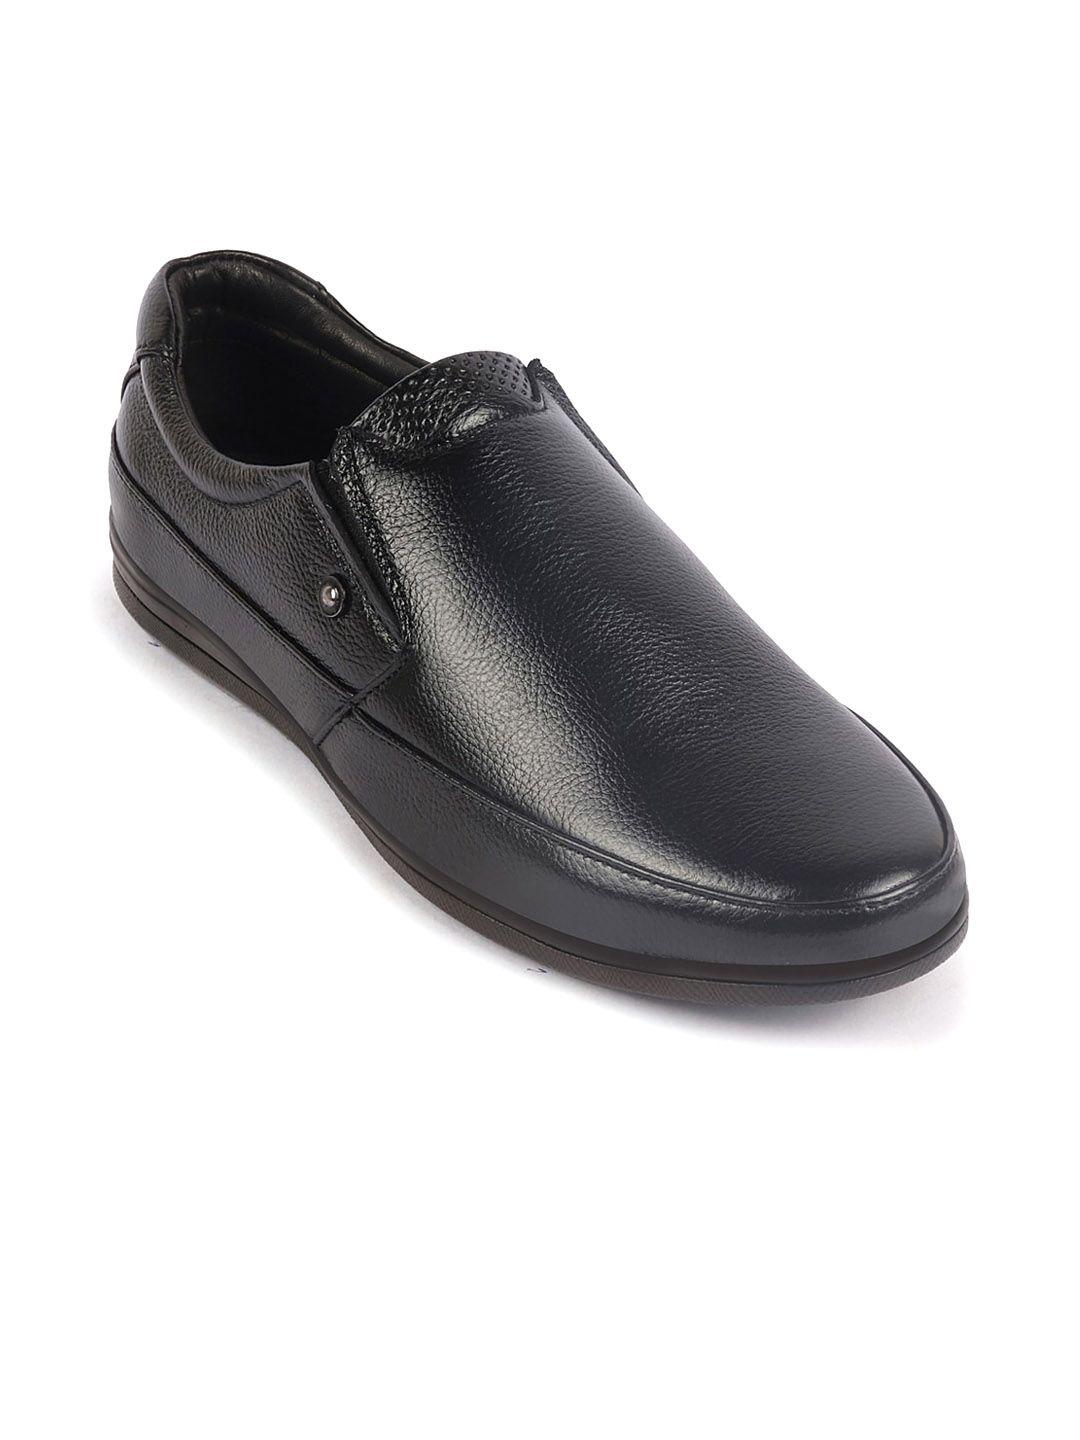 FAUSTO Men Textured Leather Formal Slip-On Shoes